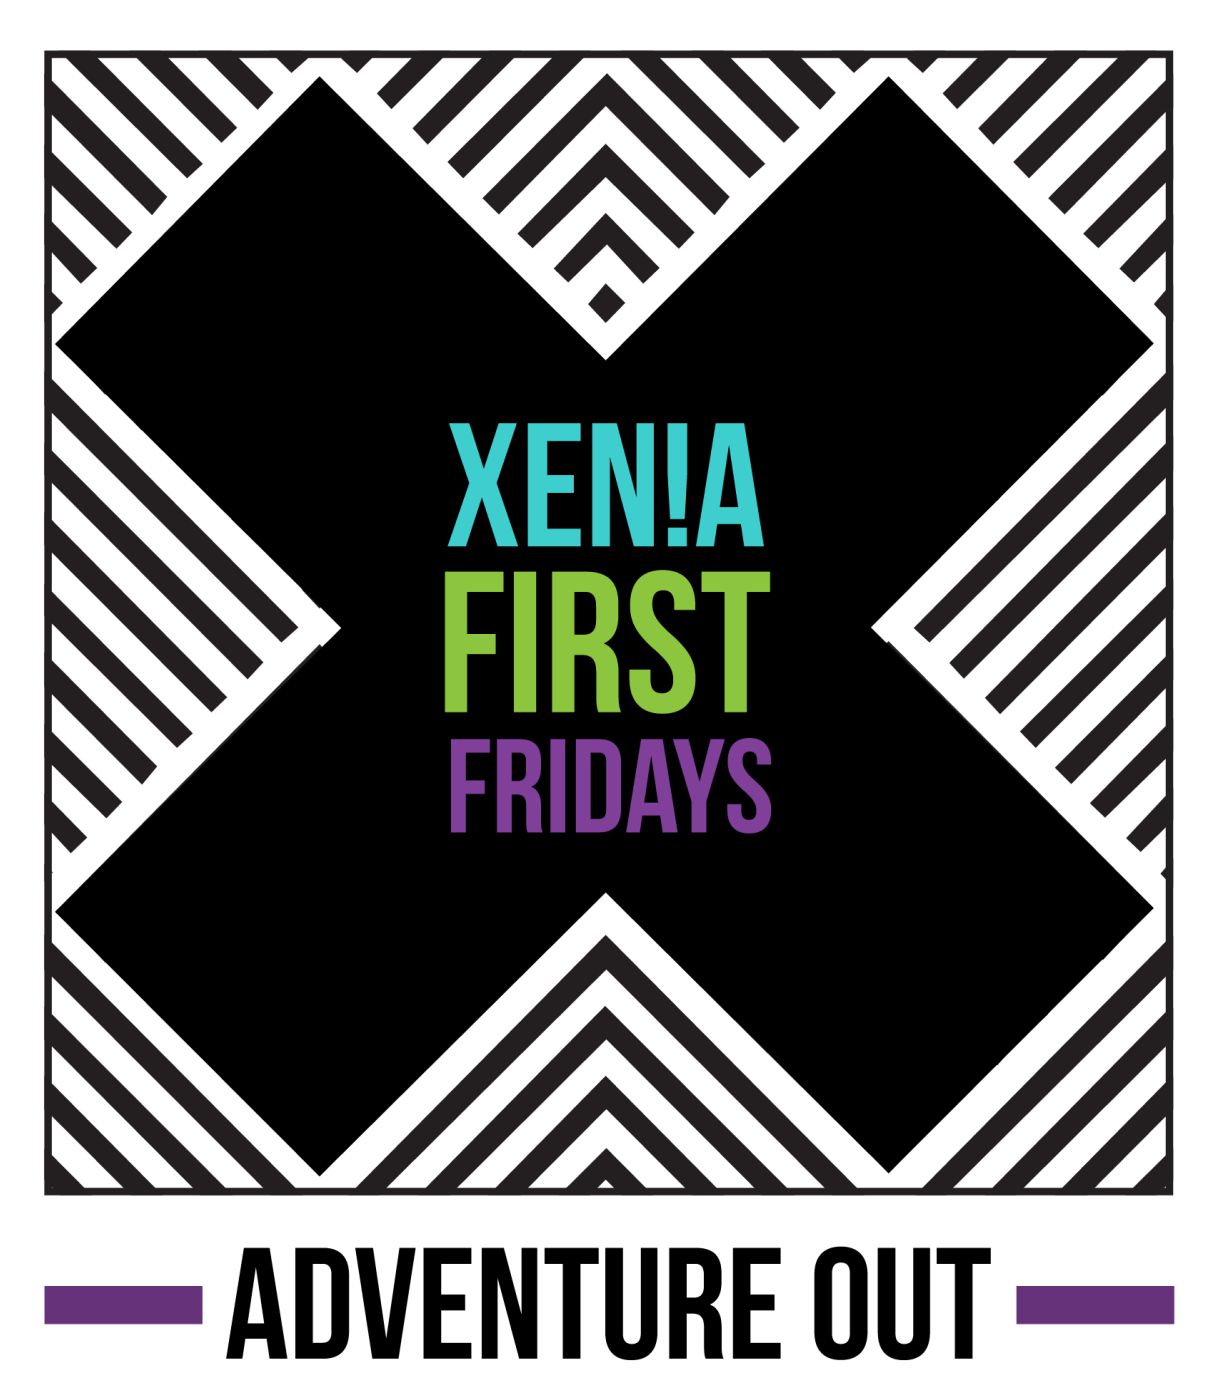 FIRST FRIDAYS FUN CONTINUES INTO JUNE